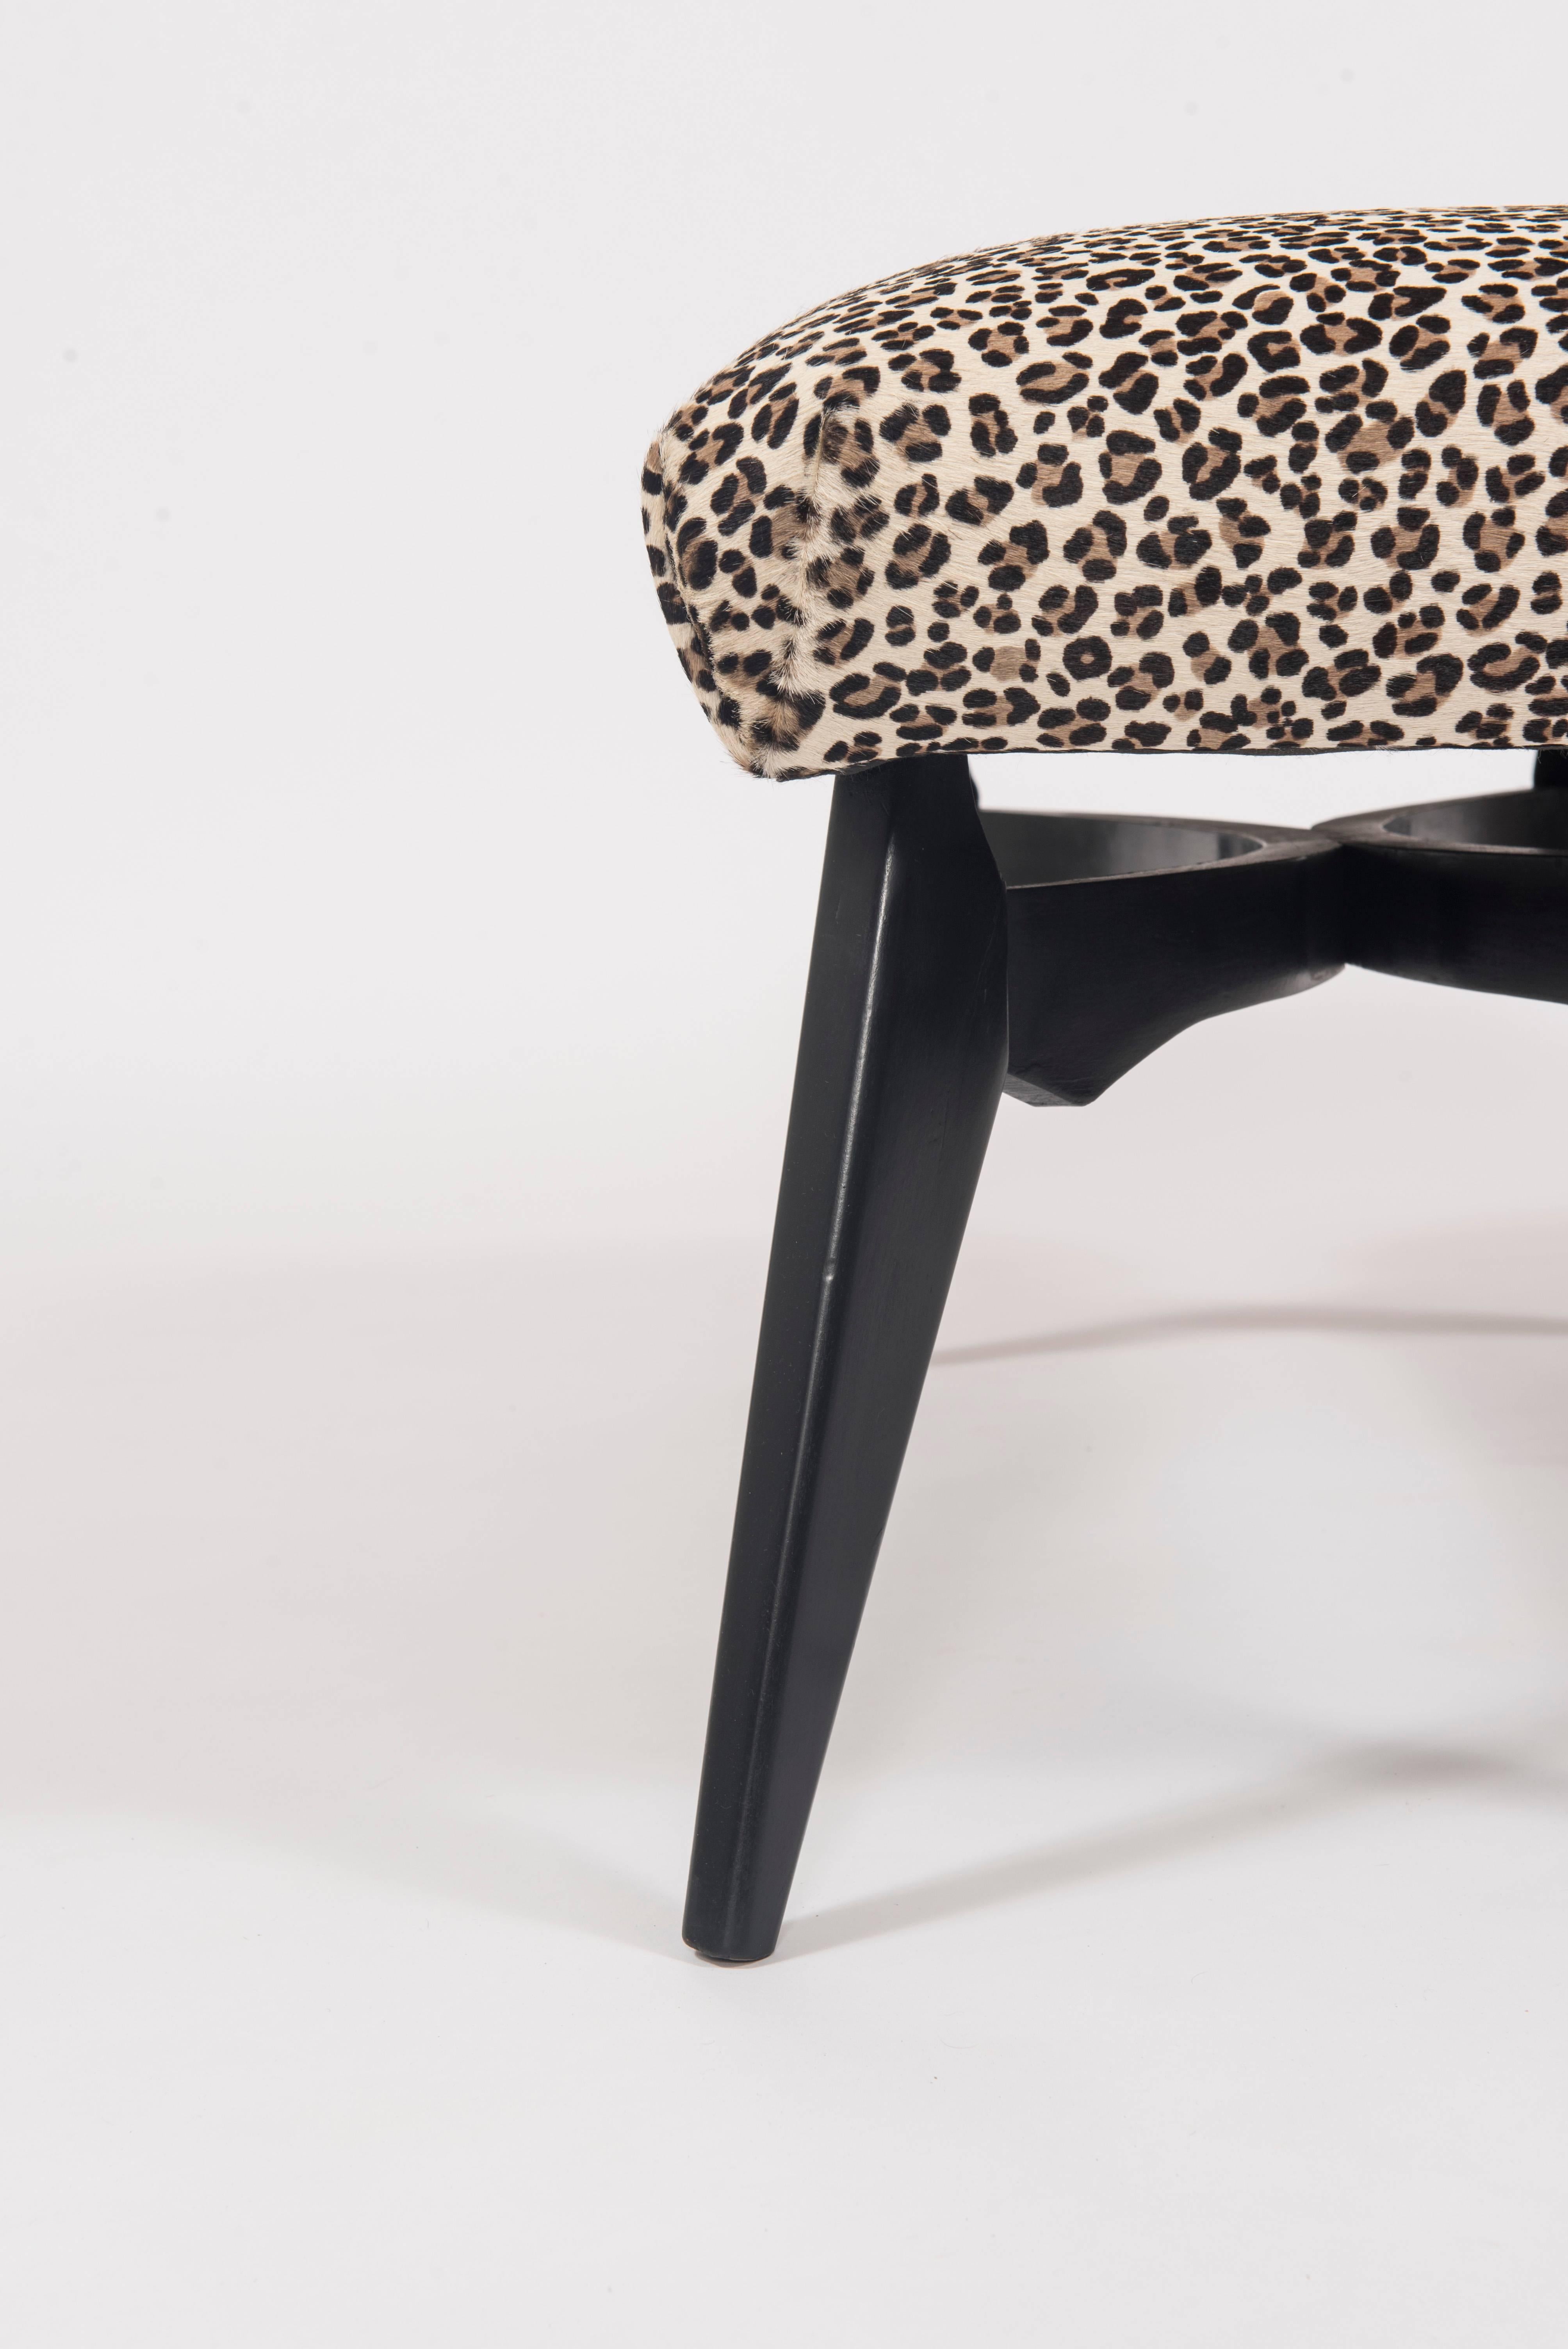 Mid-Century Modern Italian Gio Ponti Inspired Bench Upholstered in Leopard Print Hair Hide